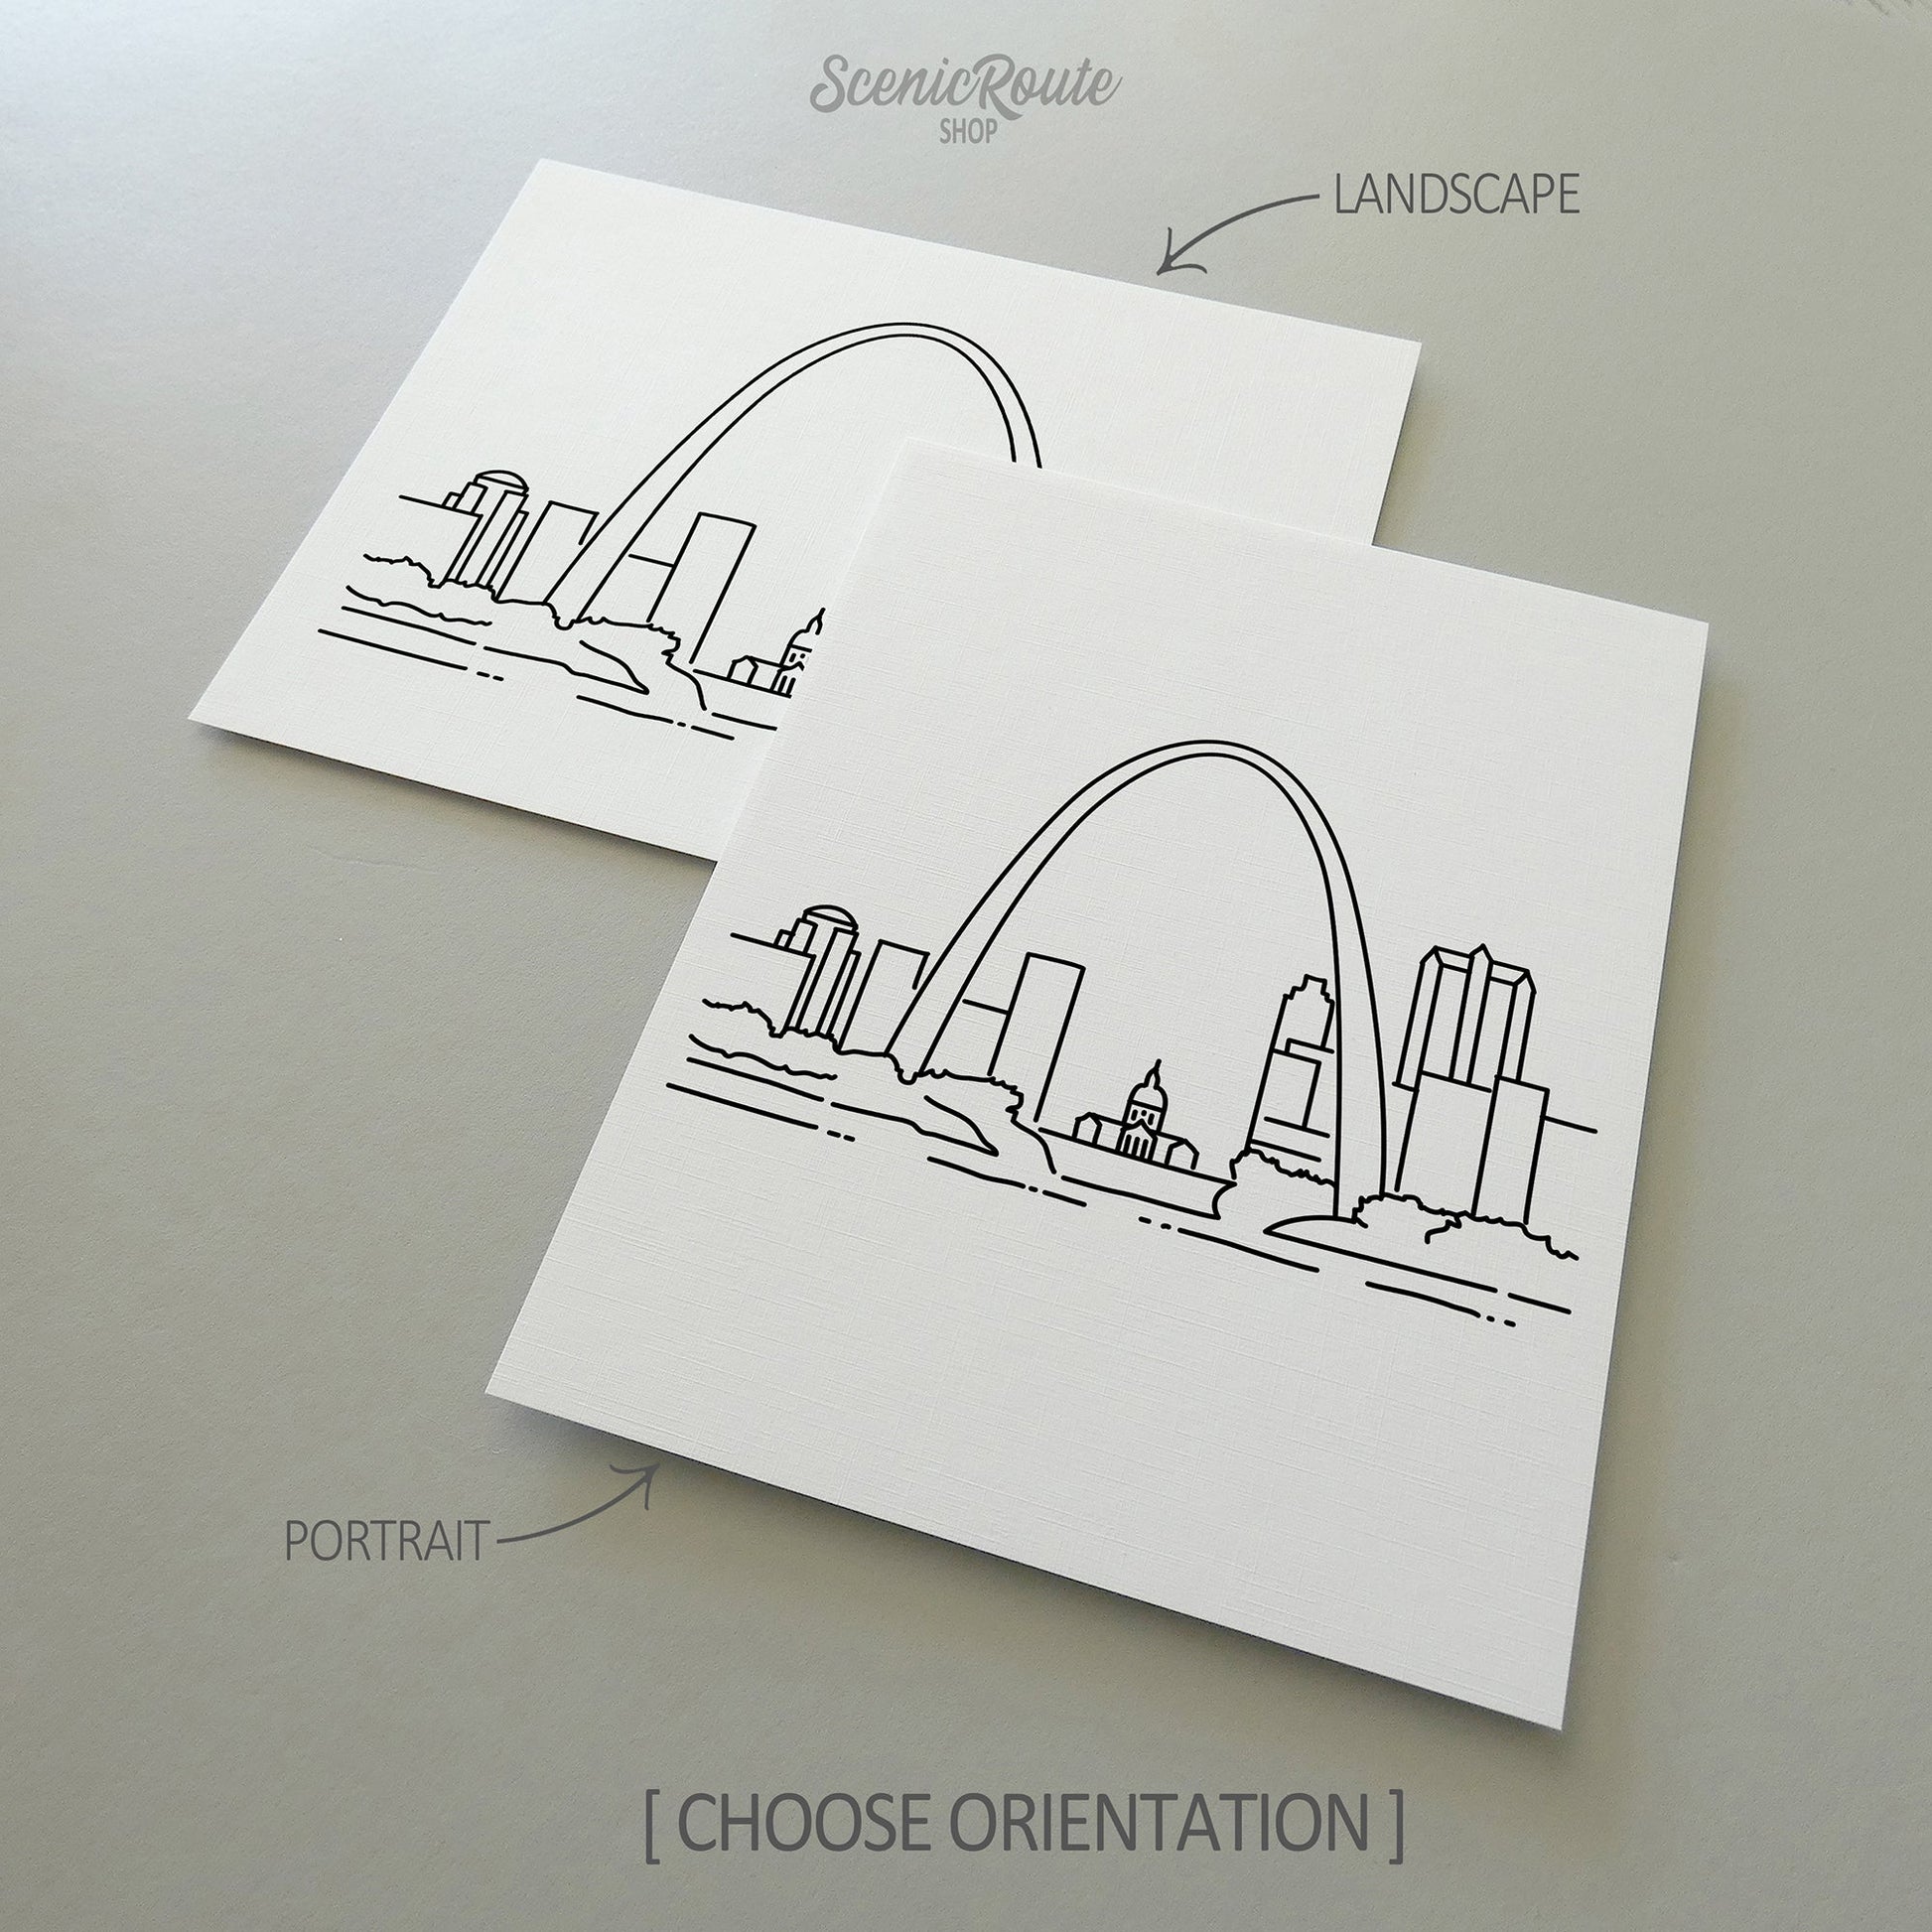 Two line art drawings of the Saint Louis Skyline on white linen paper with a gray background.  The pieces are shown in portrait and landscape orientation for the available art print options.